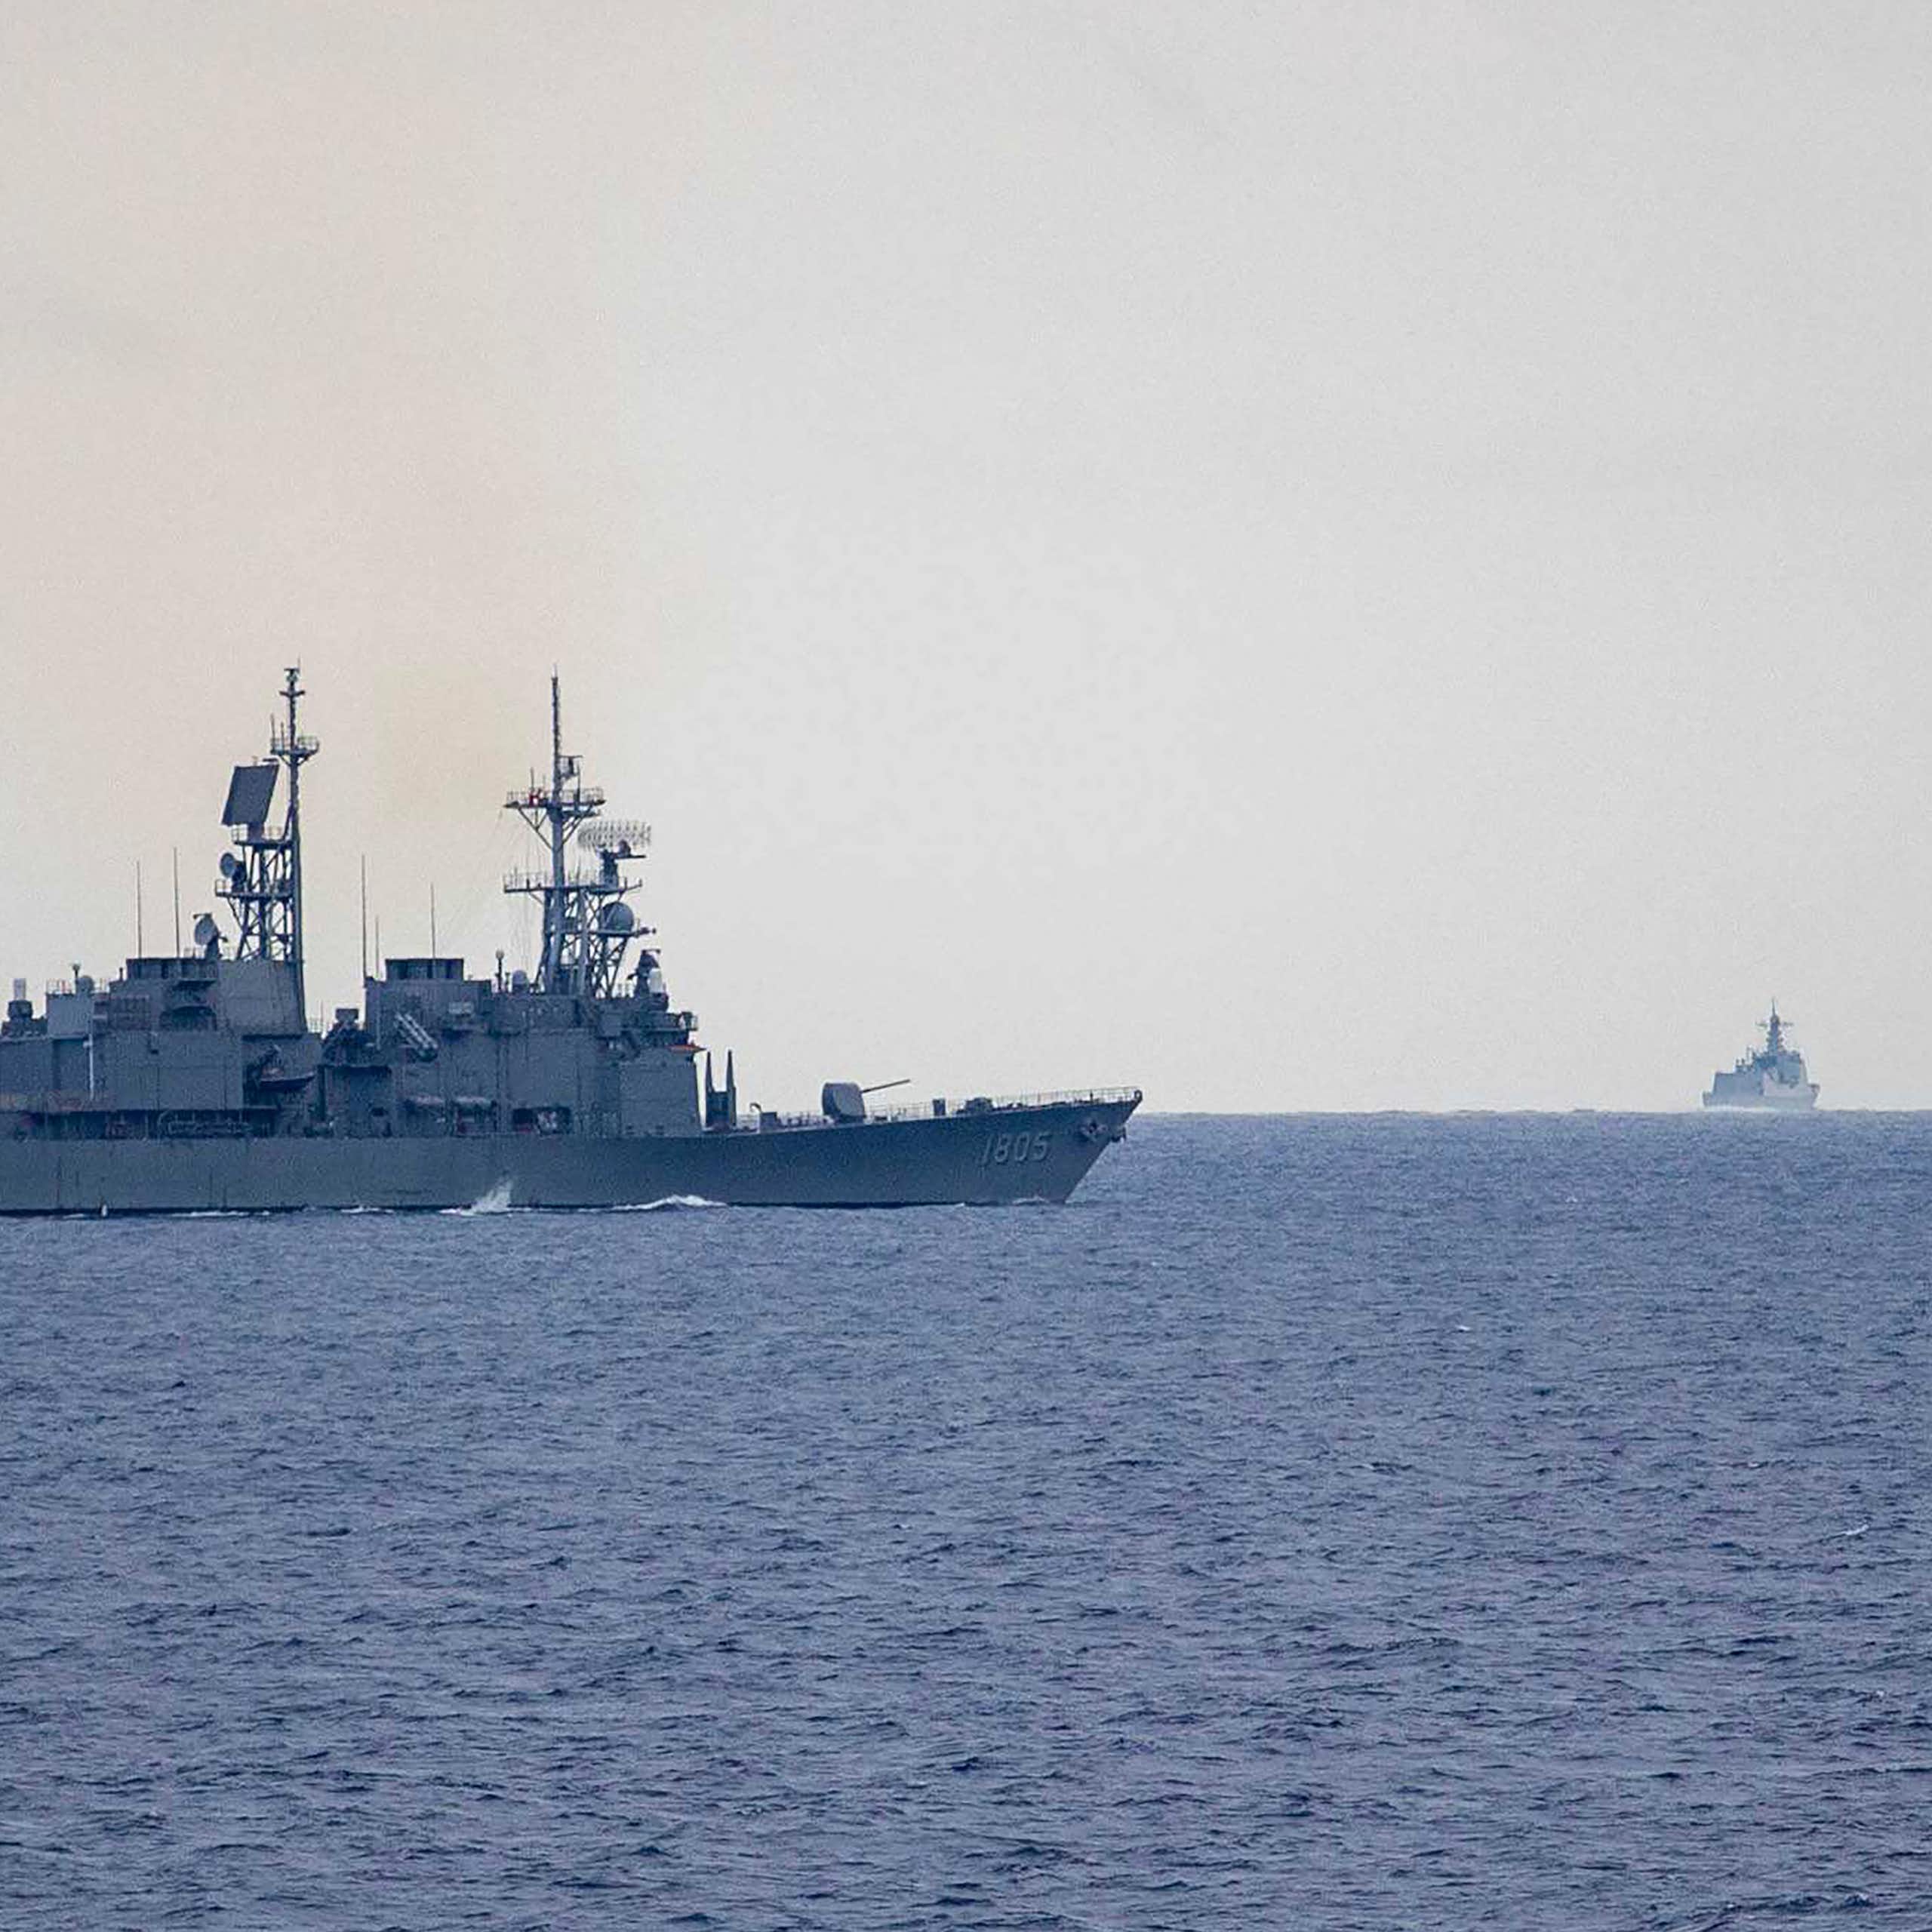 Two military destroyers, one further off on the horizon.